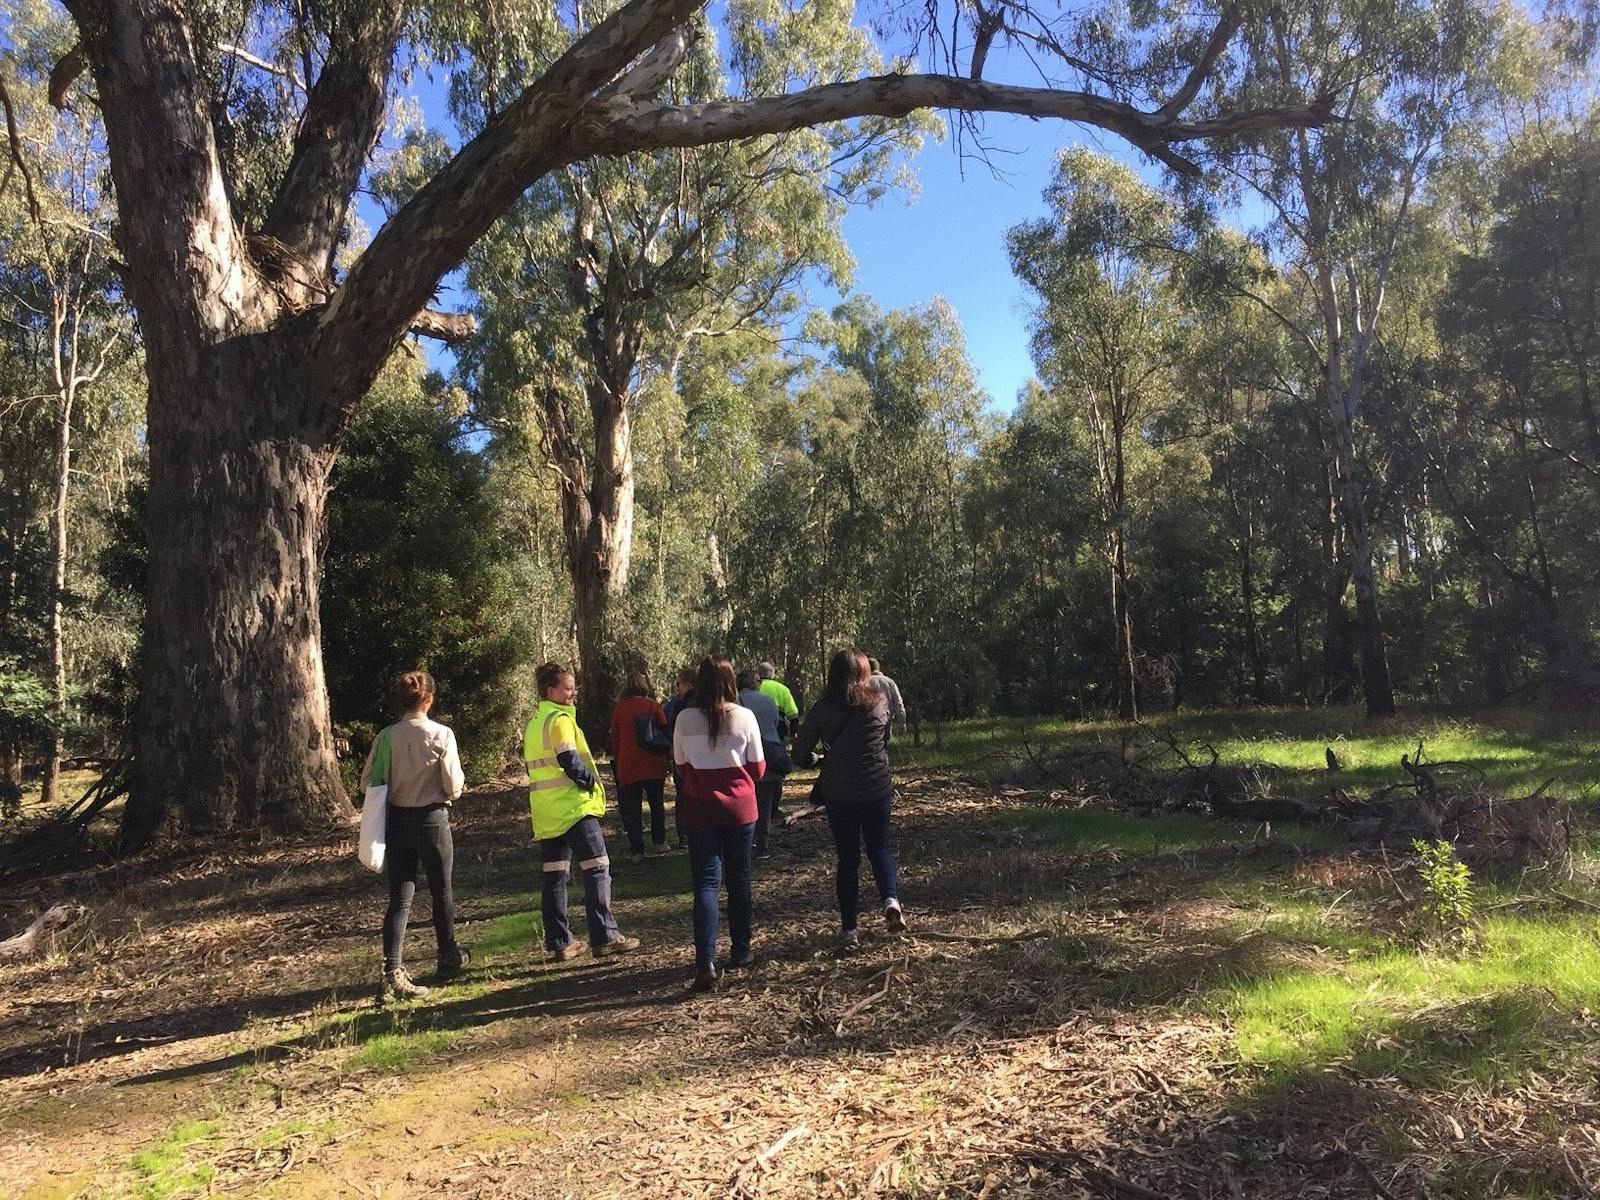 Group on walking track, grass, gum trees, sunlight, dried leaves, fallen branches